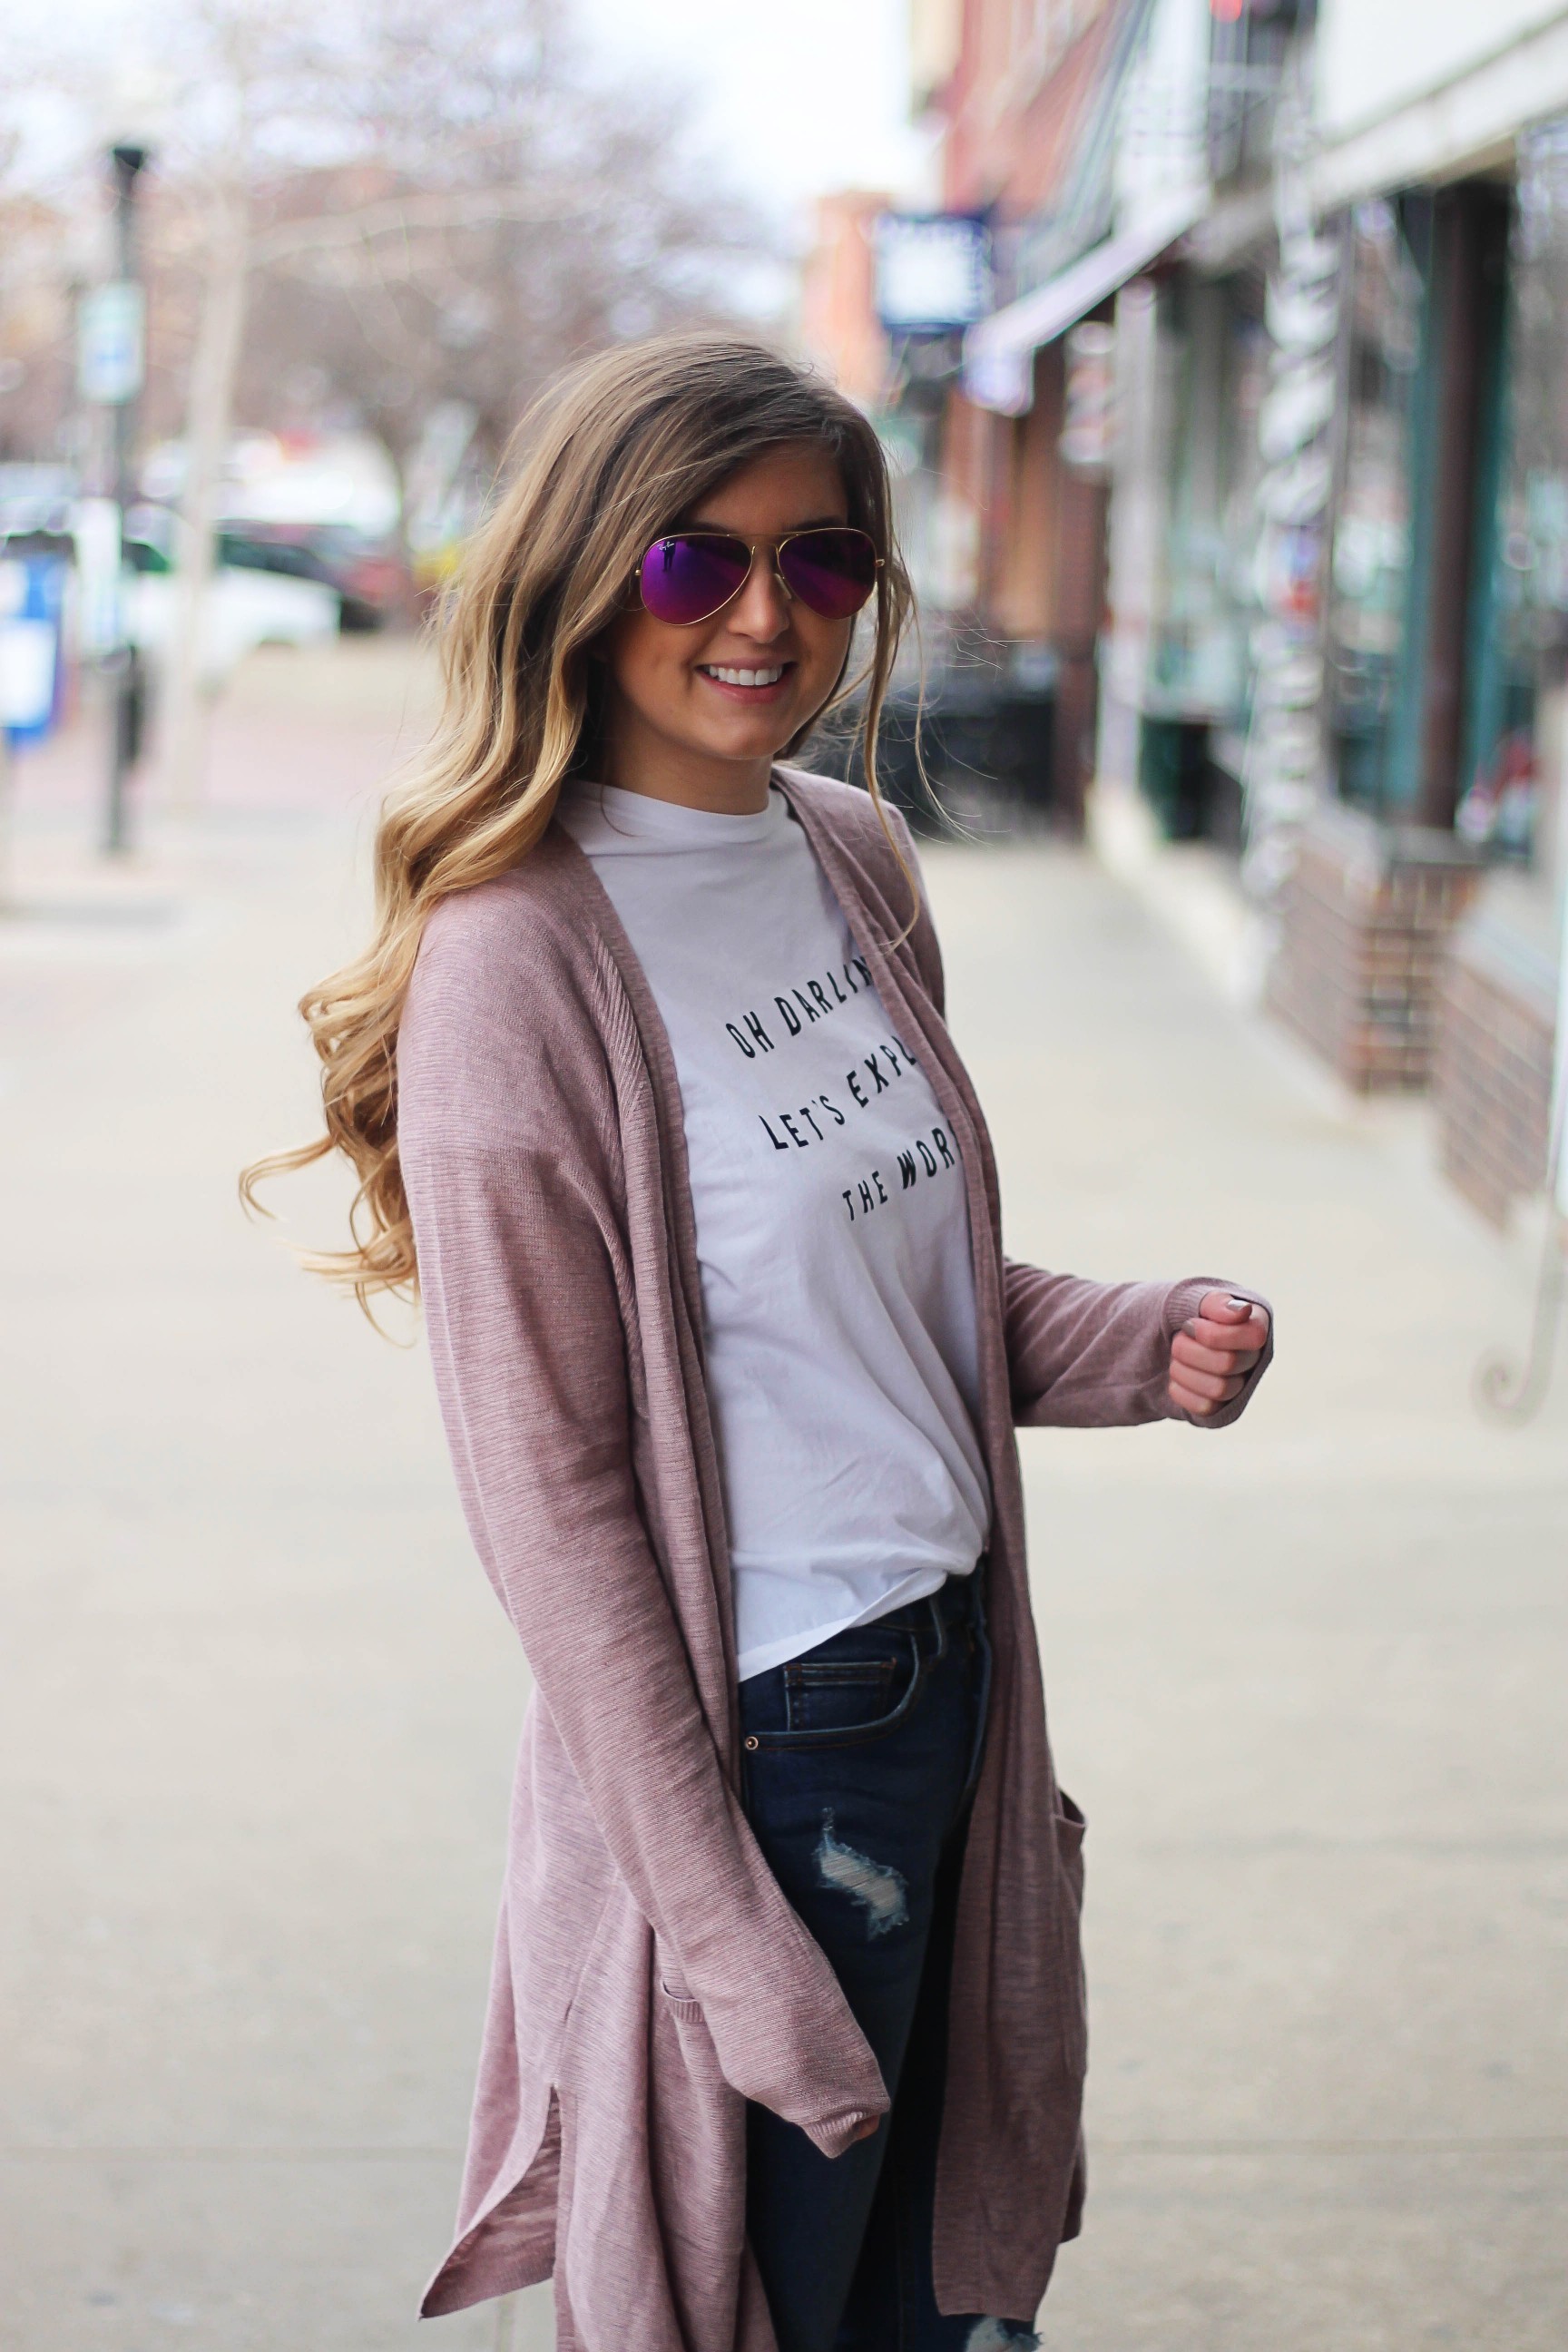 The cutest purple/pink cardigan for spring paired with my Oh Darling Let's Explore the World tee! I love this tee because it matches my wanderlust! I paired it with my favorite ripped jeans and tan suede booties. Plus of course my pink ray bans! By Lauren Lindmark on Daily Dose of Charm